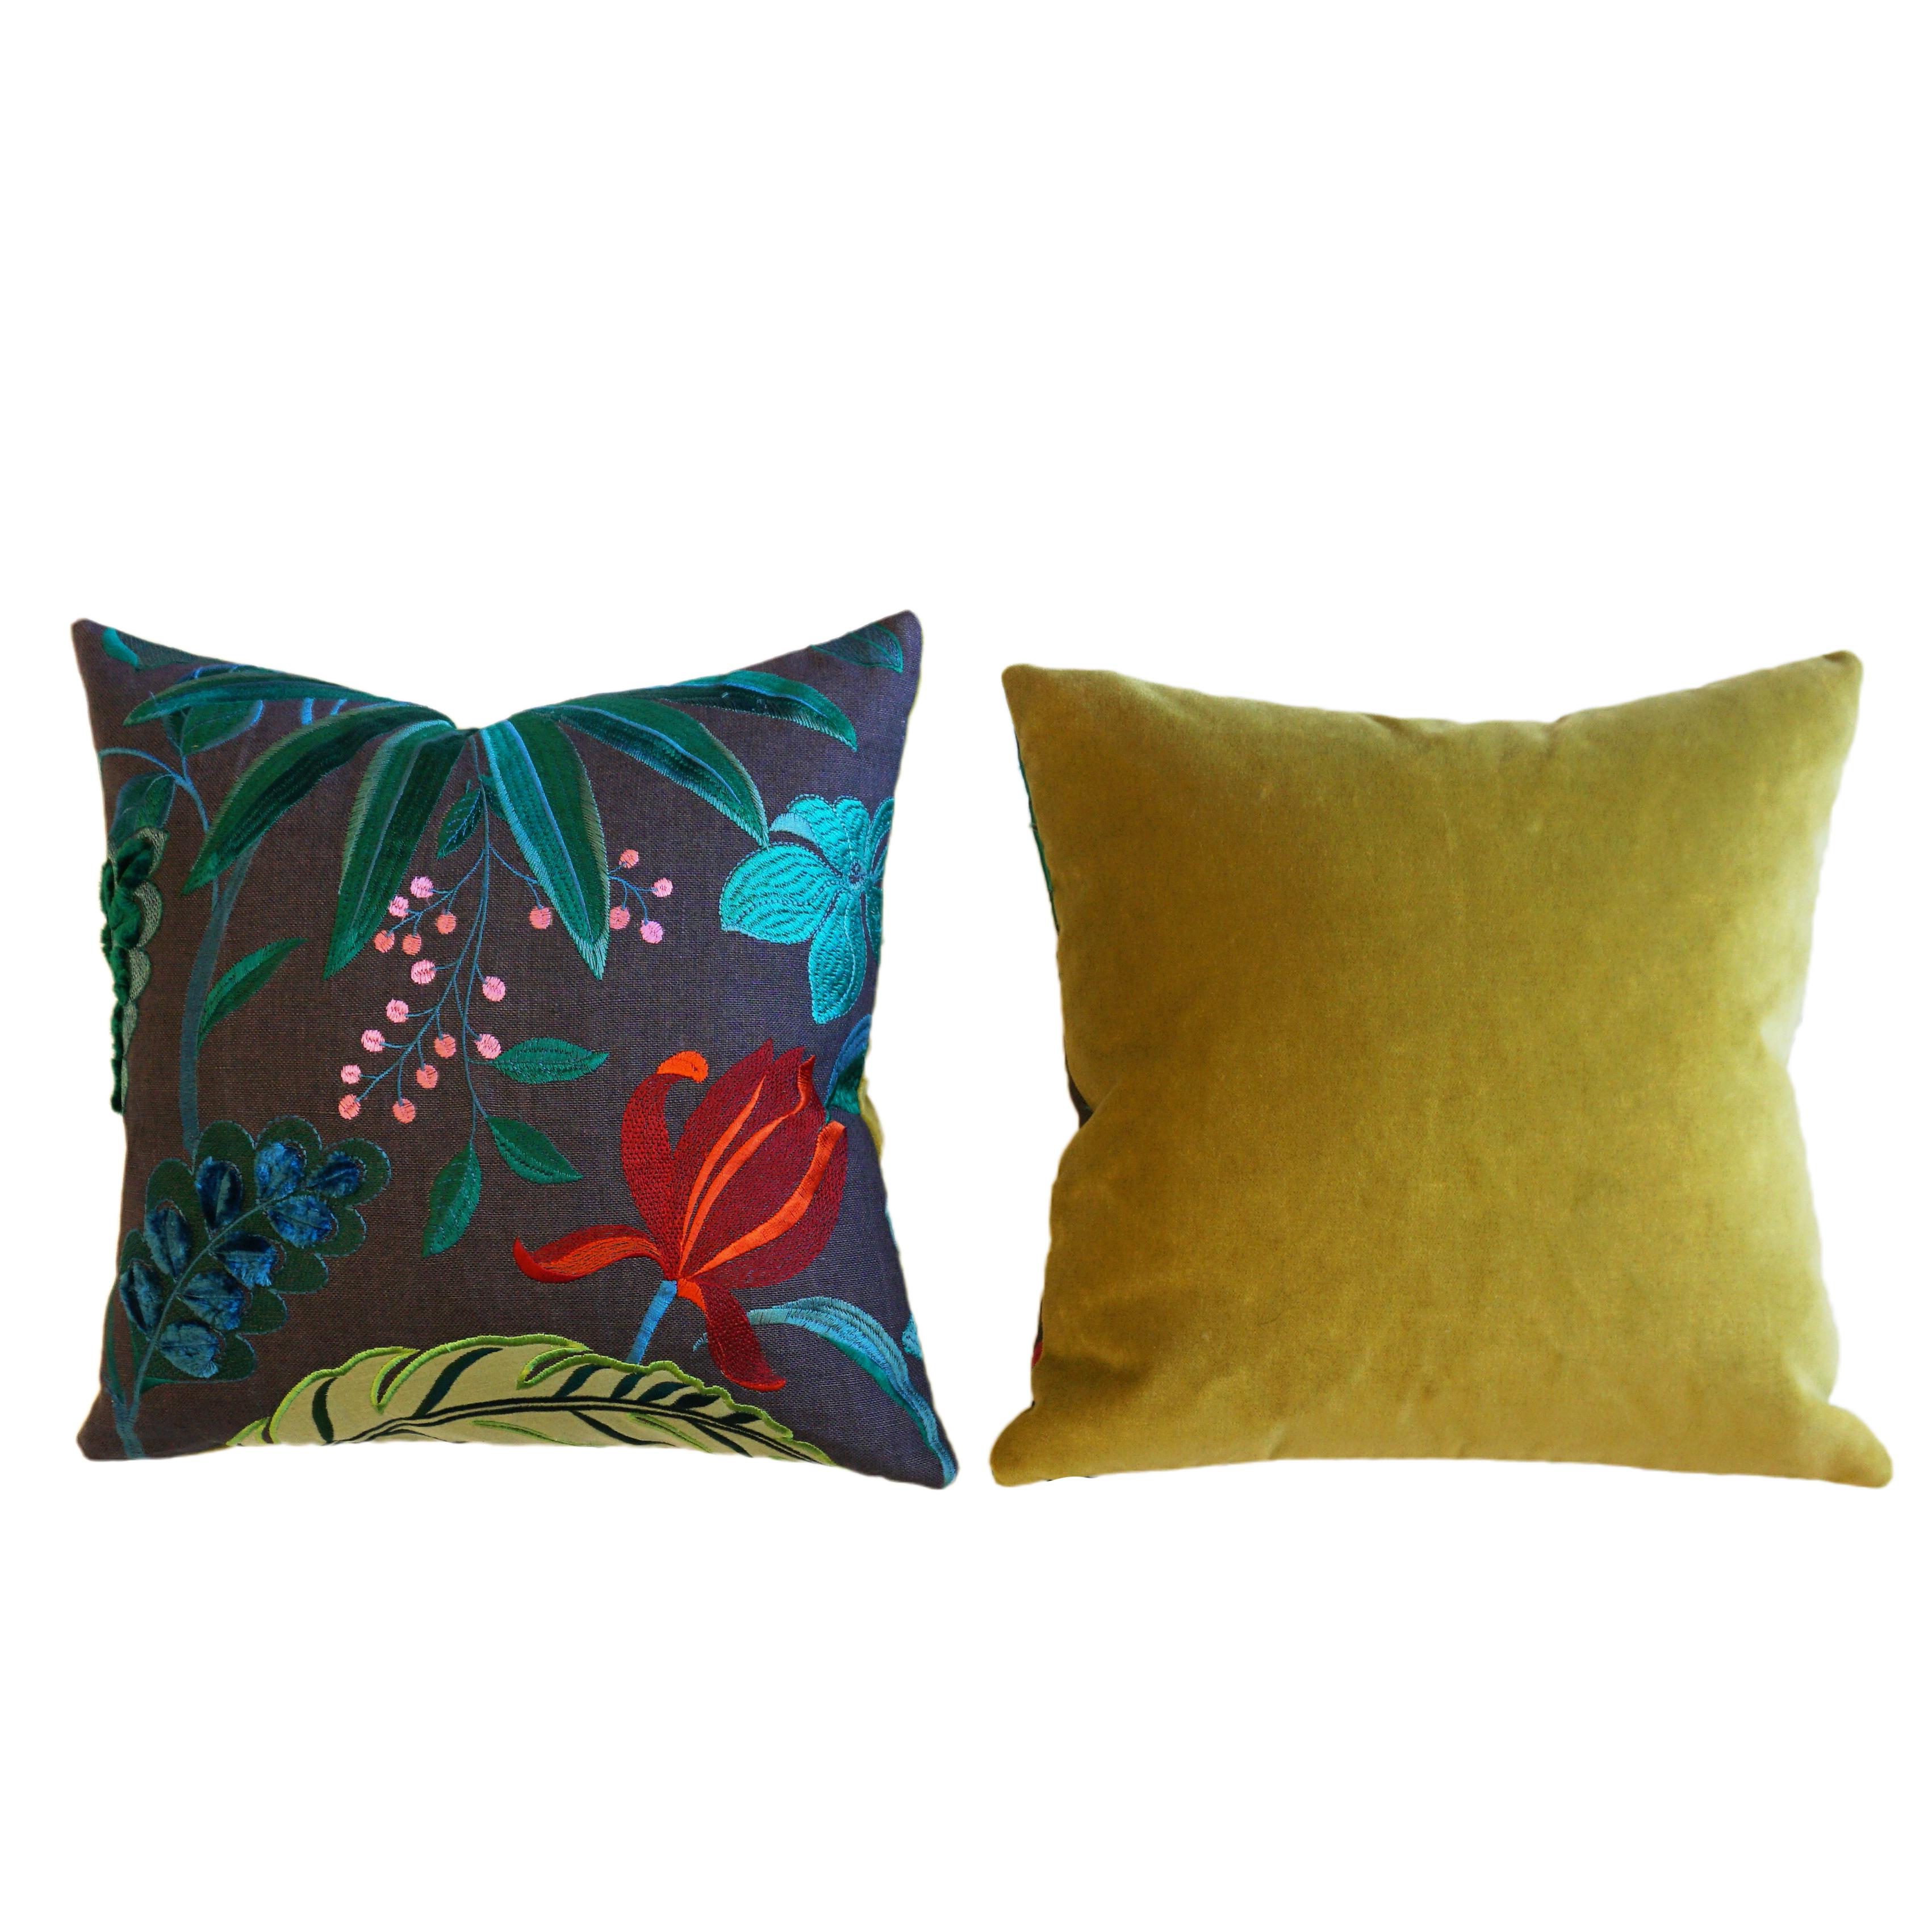 American Floridita Throw Pillows with Floral Embroidery